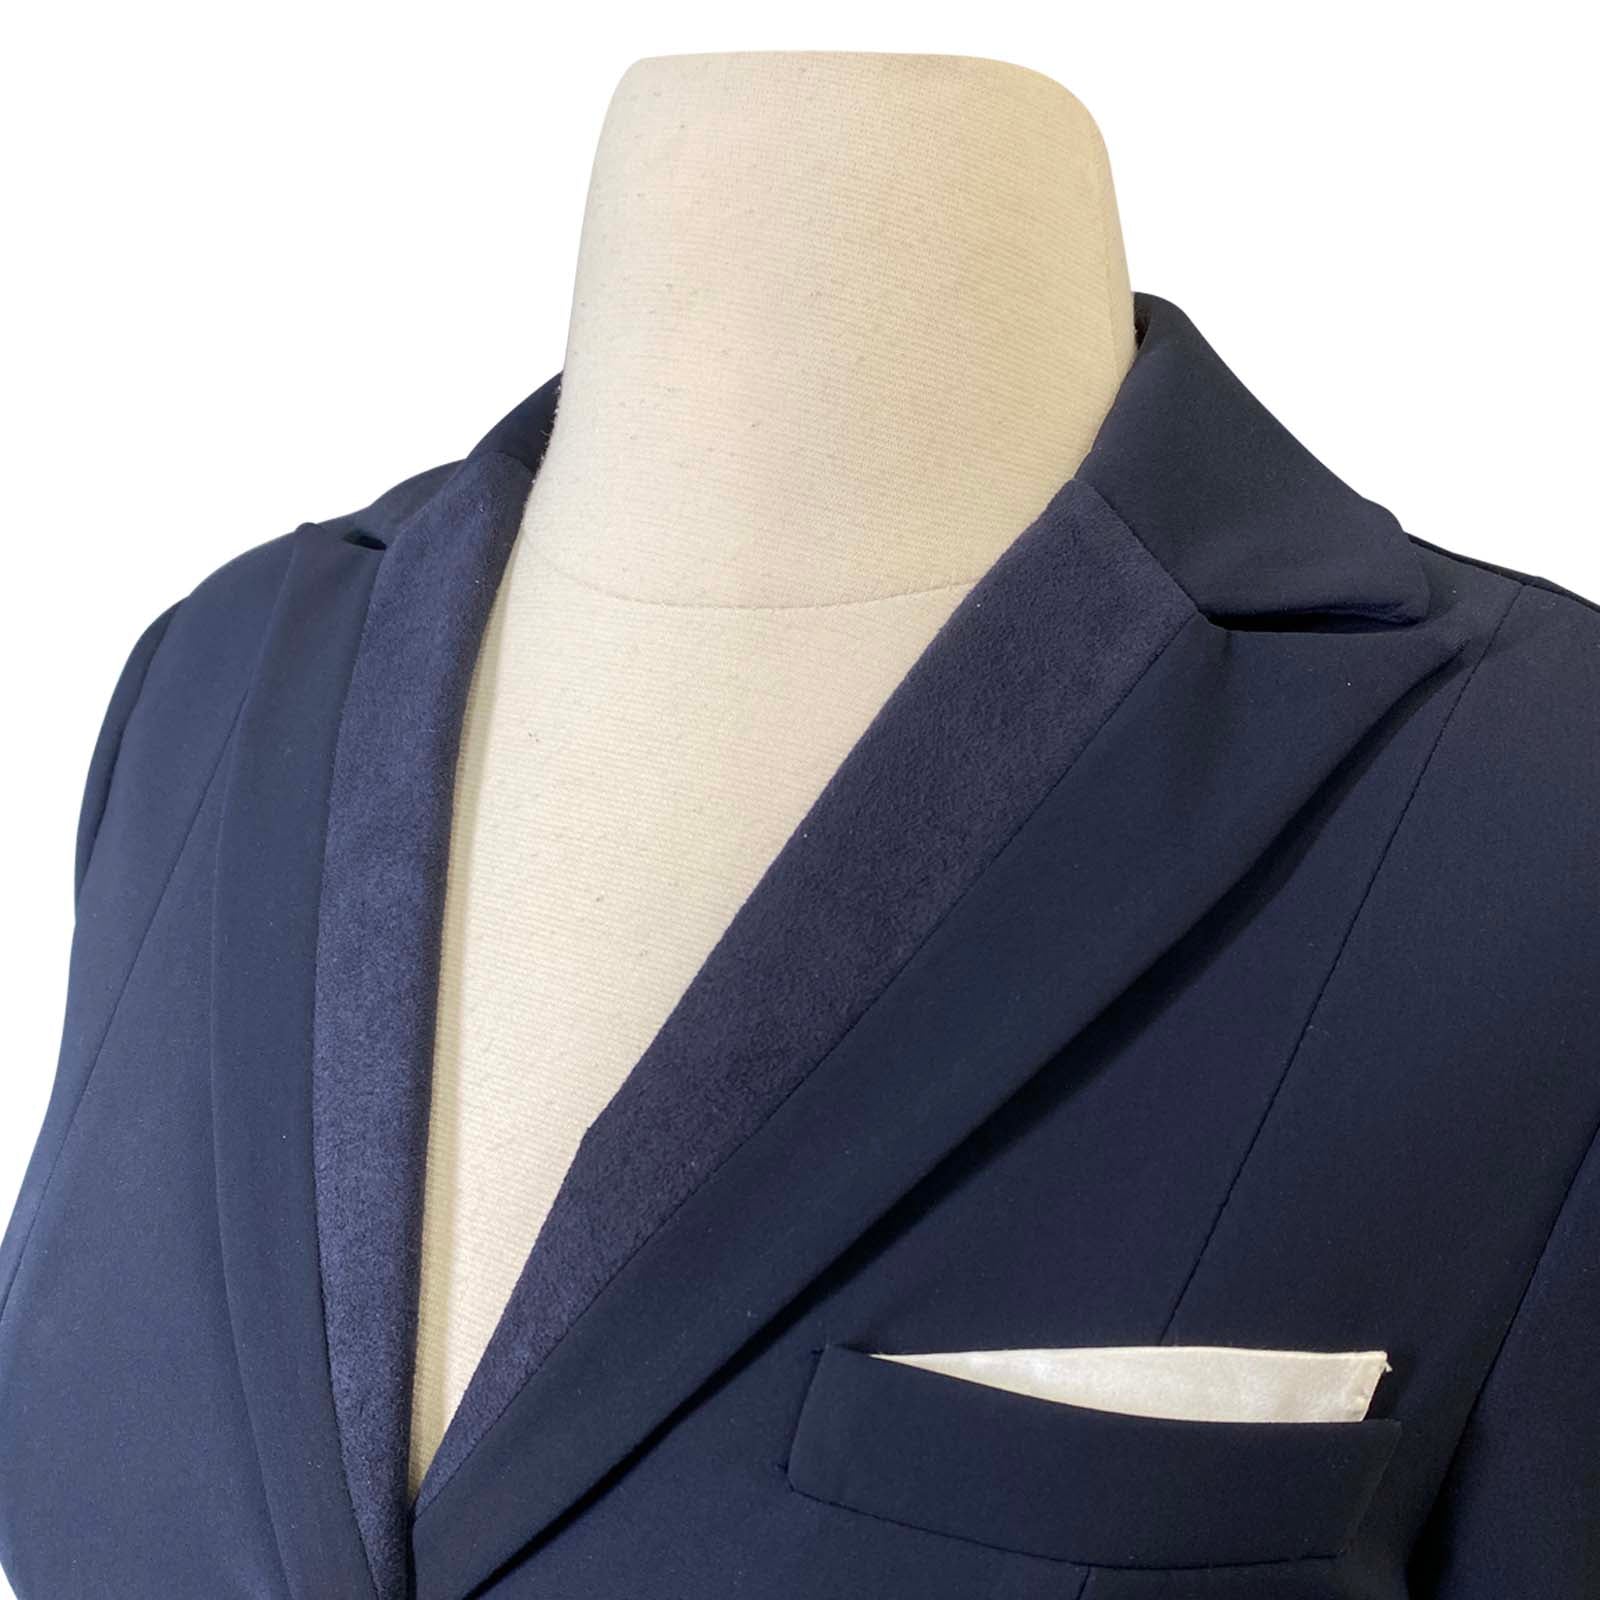 Collar of Samshield 'Louise' Show Jacket in Navy - Approx. Women's US 12